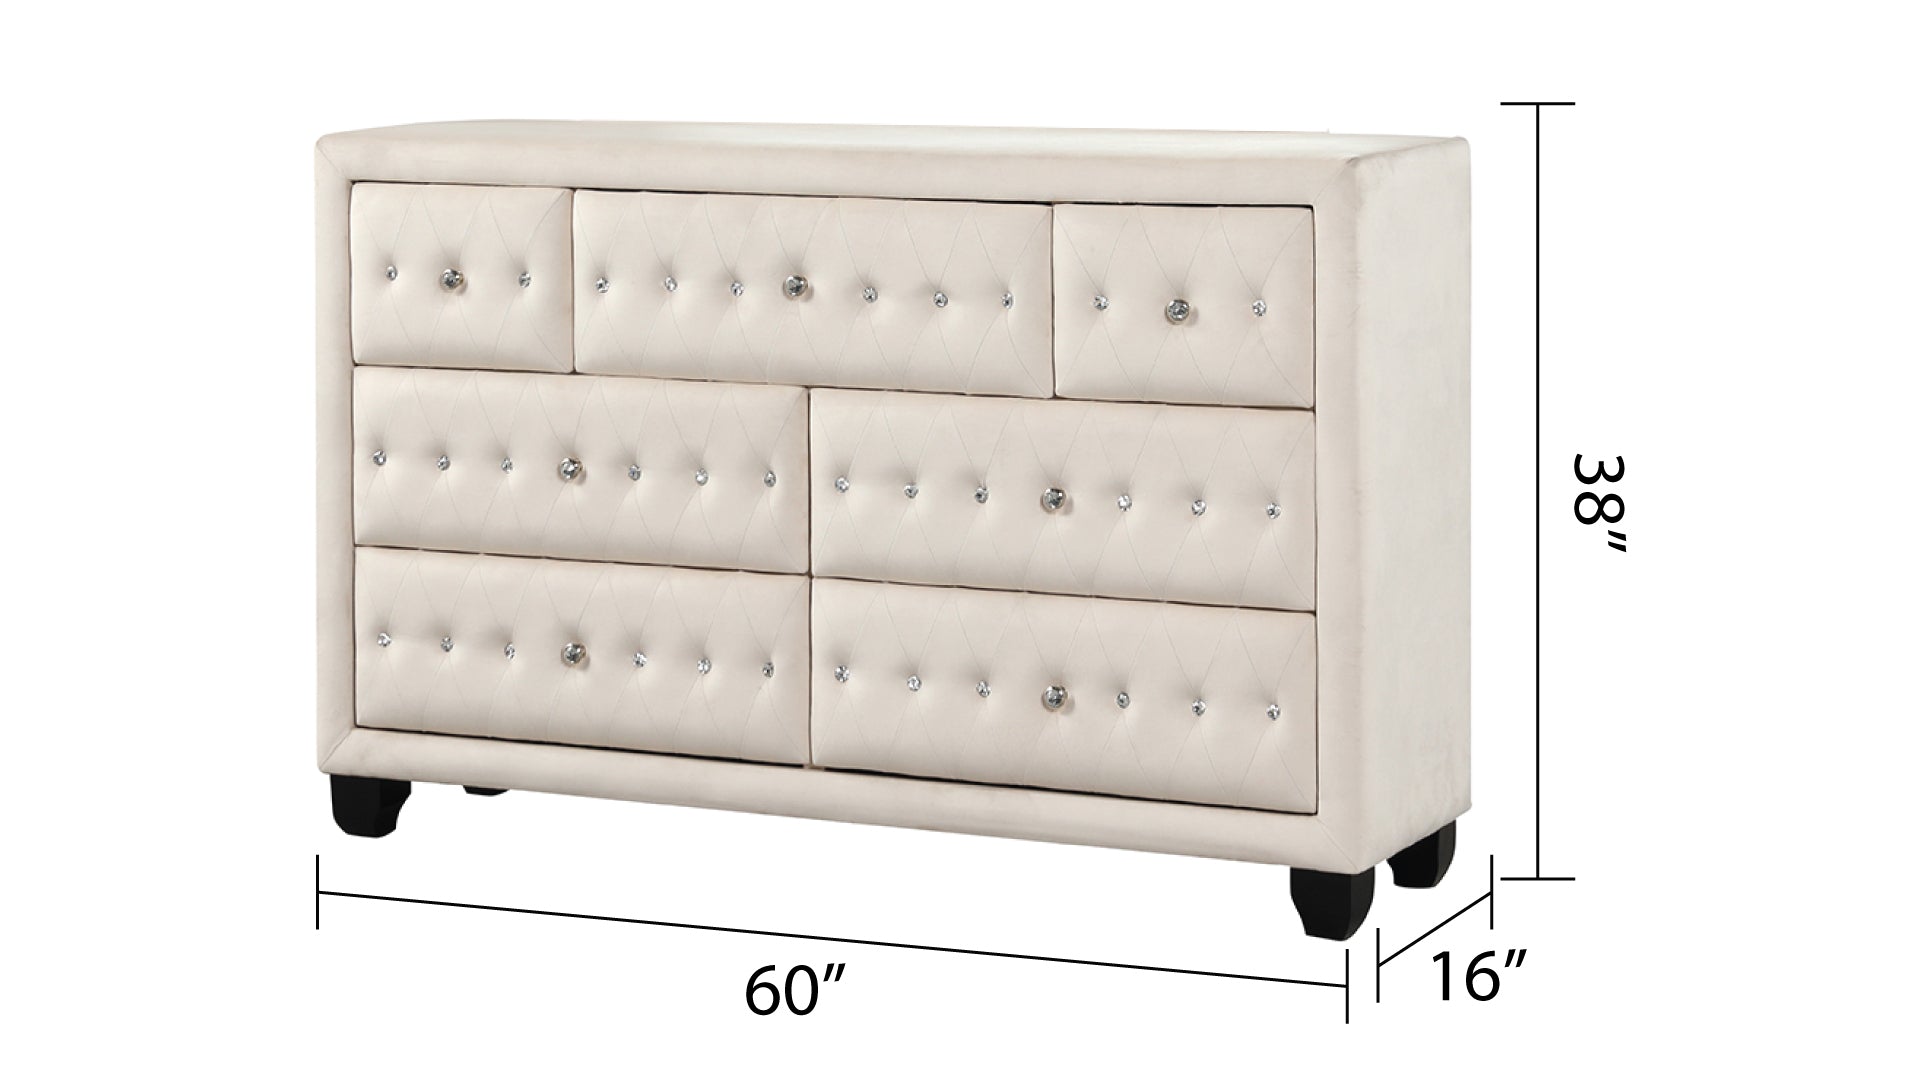 Sophia Crystal Tufted Full 4 Pc Bed Made with Wood in Cream - Enova Luxe Home Store